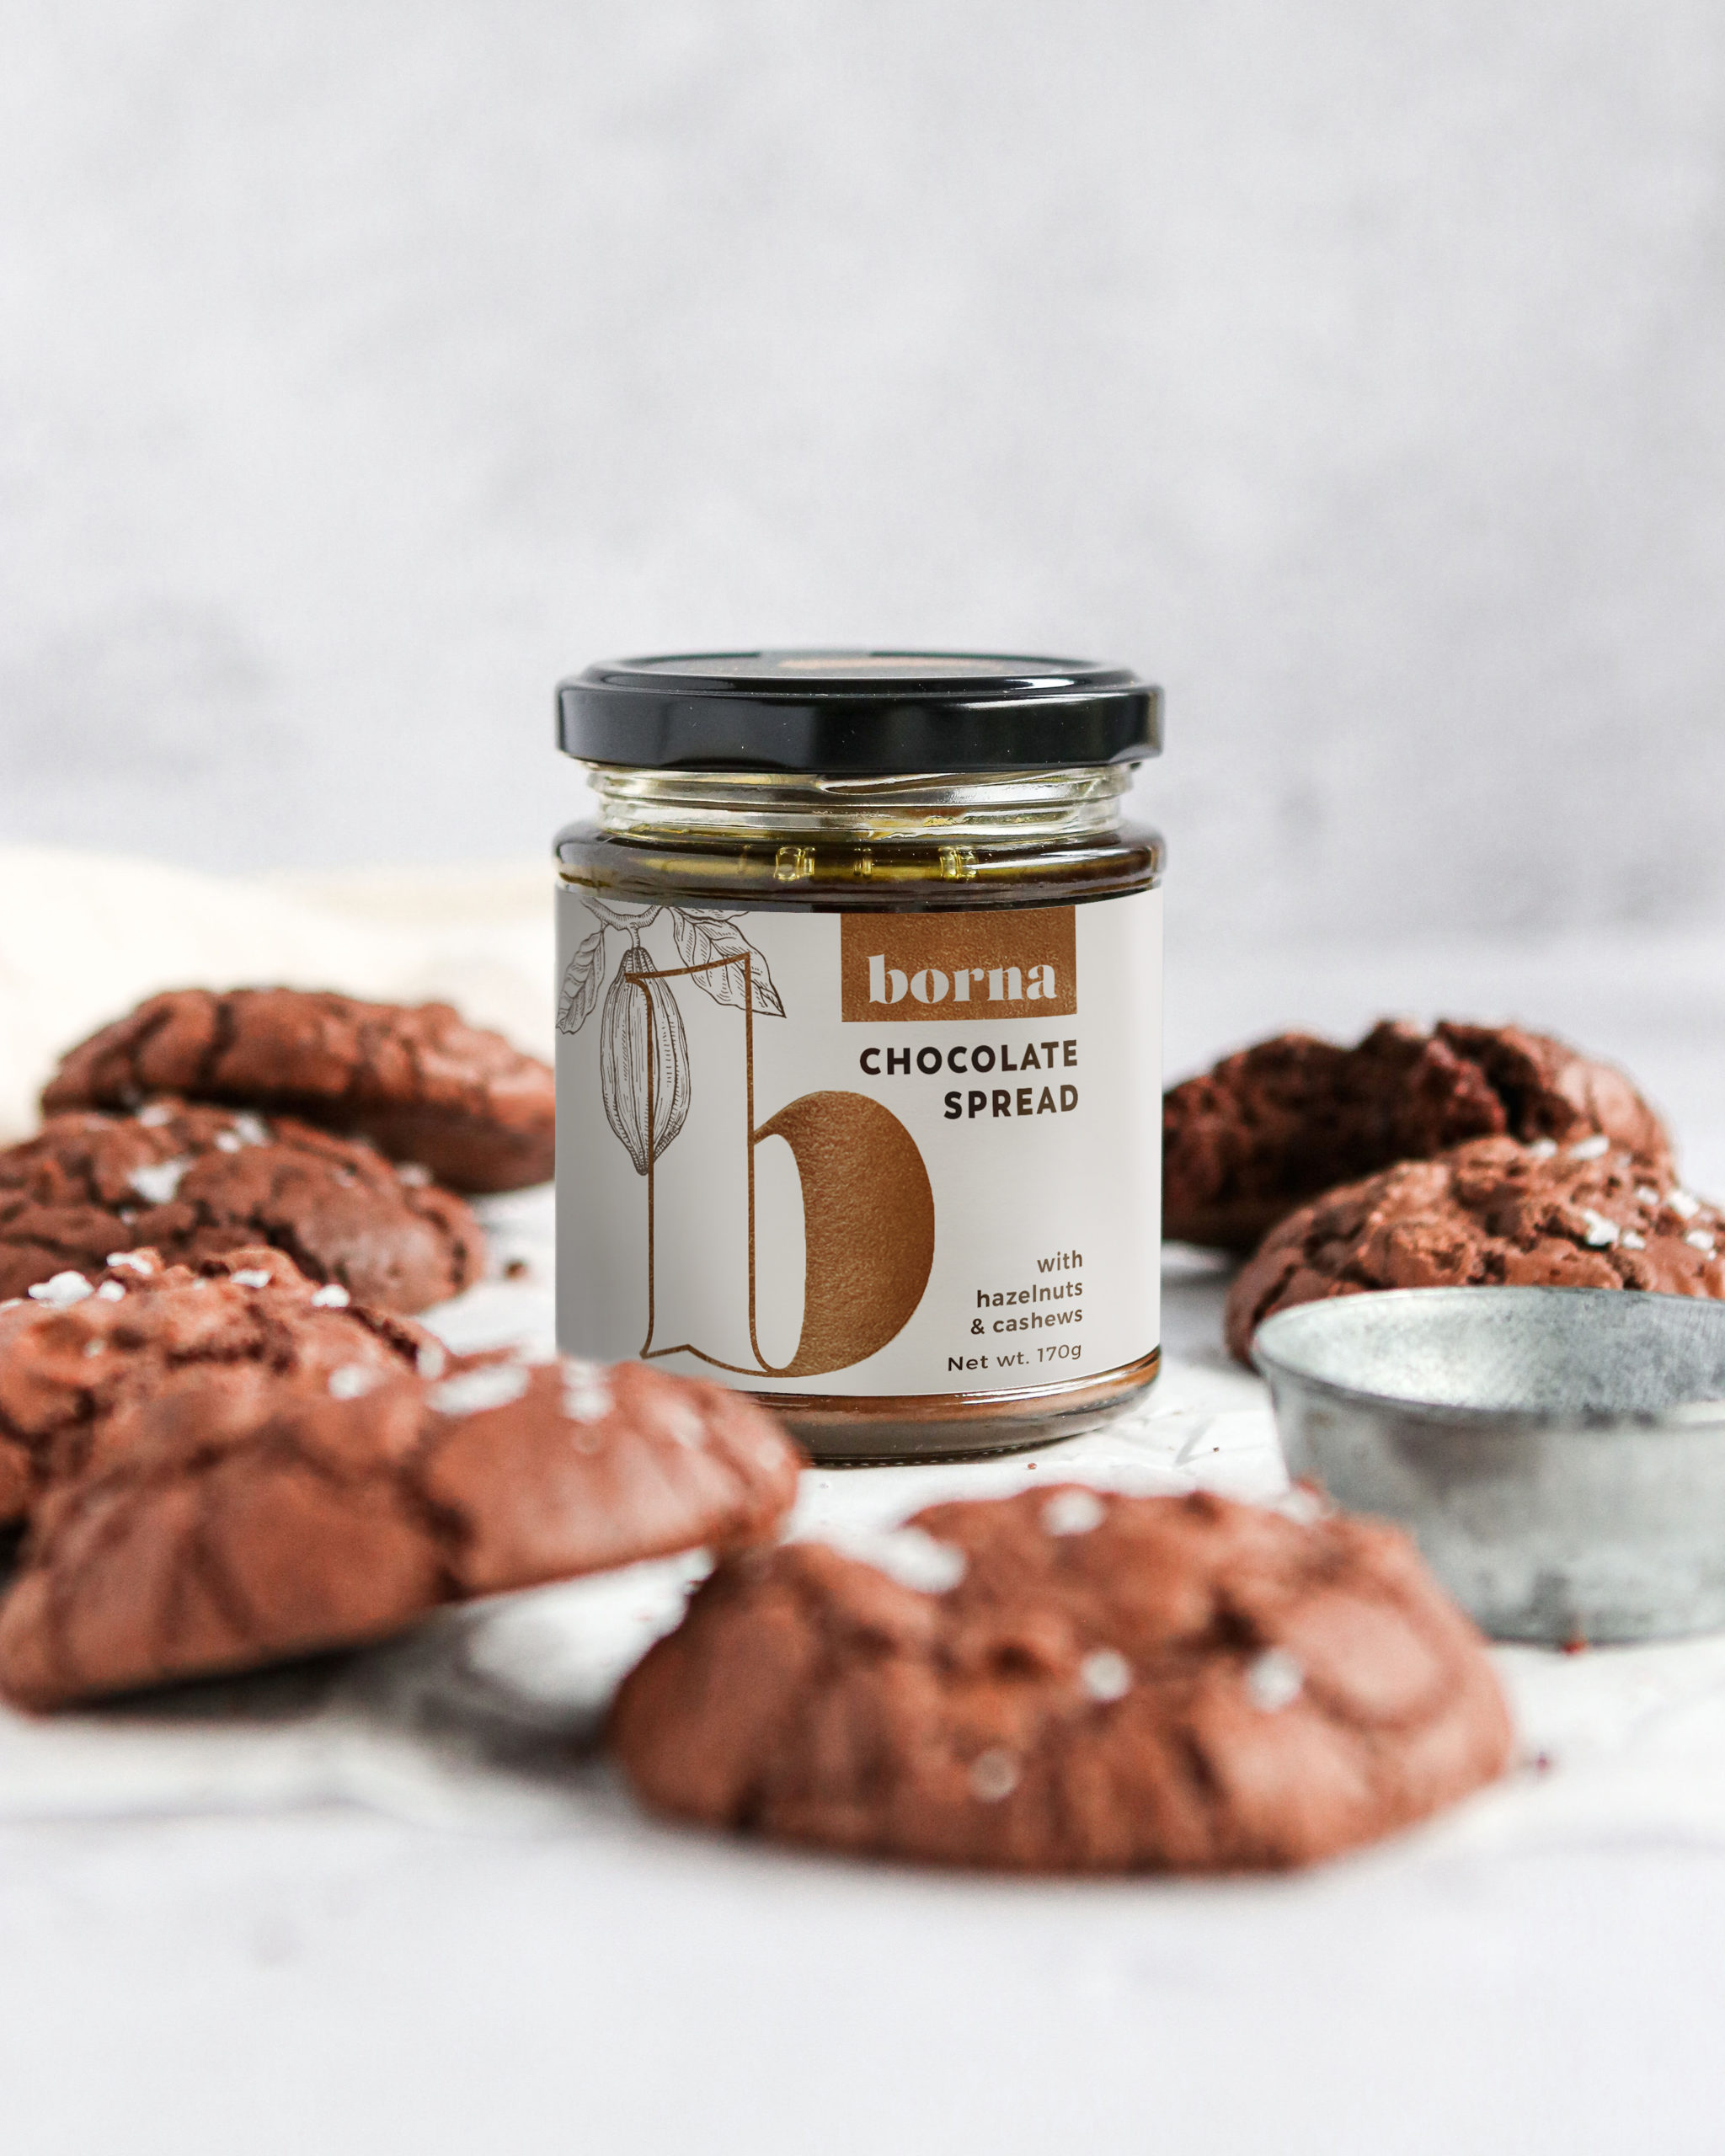 As a wave of chocolate spreads flood the market - will you go nutty for  posh chocolate spread?